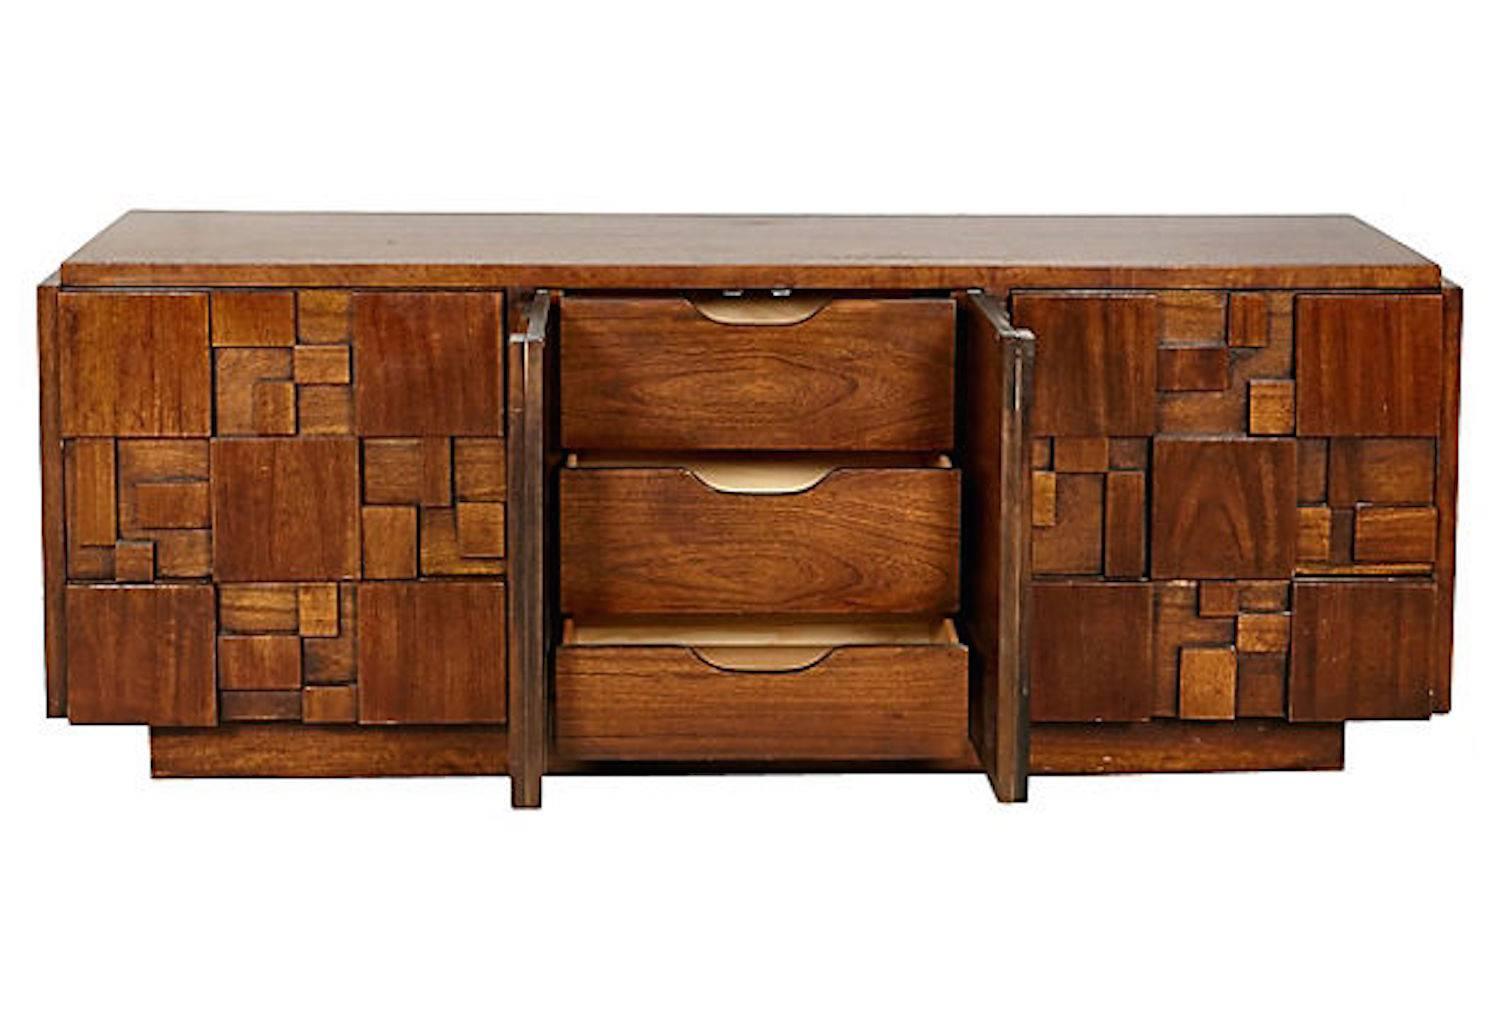 Brutalist style walnut wood nine-drawer dresser with two front panel doors manufactured by Lane Furniture Co from the 